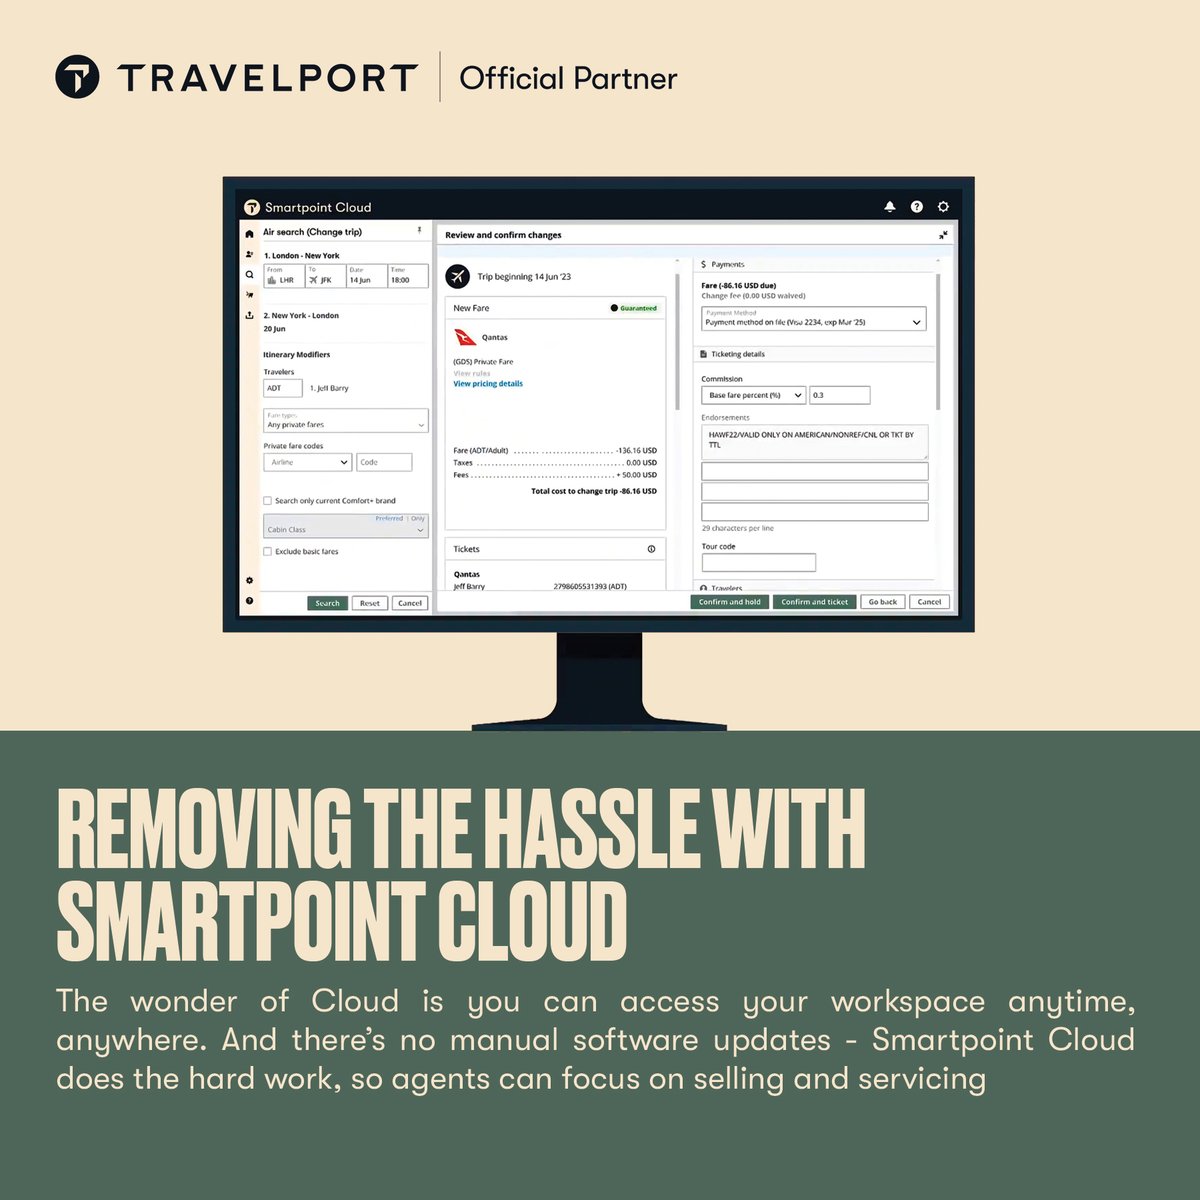 REMOVING THE HASSLE WITH SMARTPOINT CLOUD
The wonder of cloud is you can access your workspace anytime, anywhere. And there’s no manual software updates - smartpoint cloud does the hard work, so agents can focus on selling and servicing
#Smartpointcloud #Getmodern #getmoving